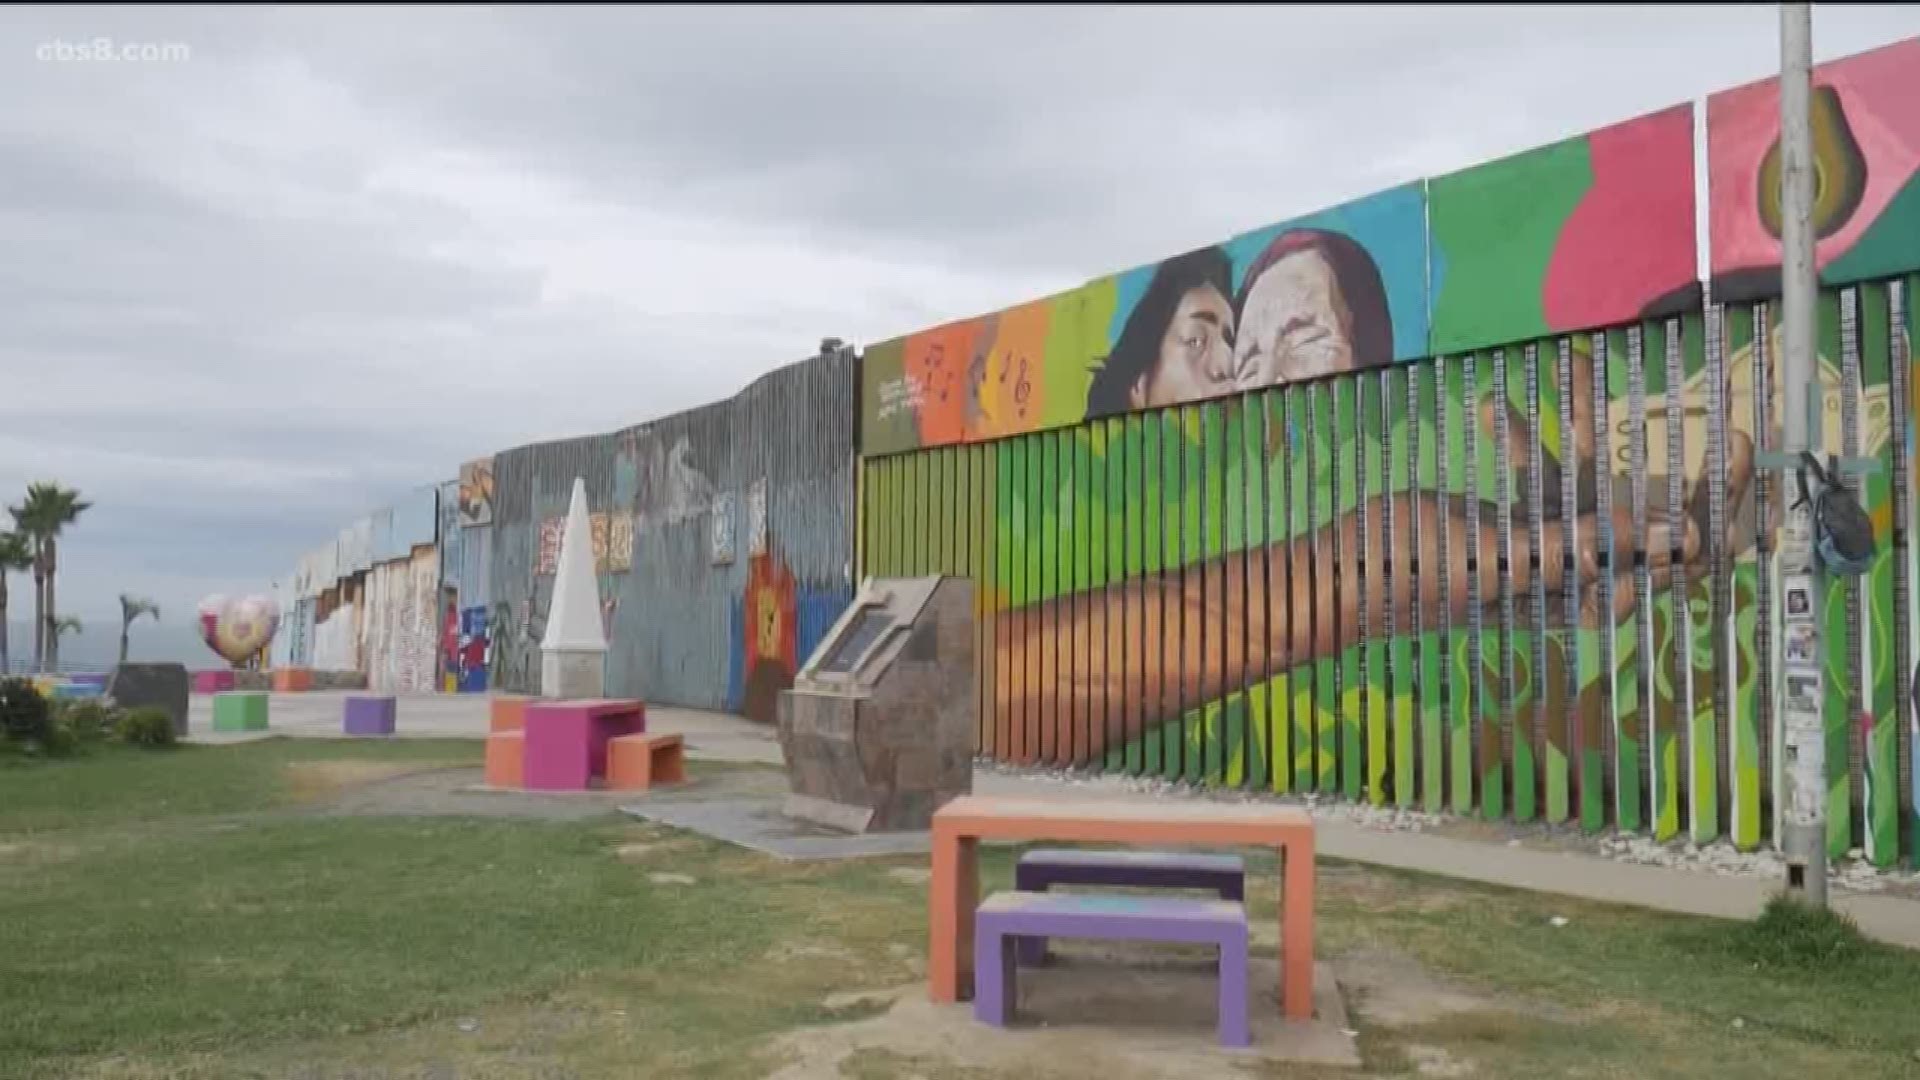 For nearly three years now, Mexican artist Enrique Chiu has been donating his time to make the border wall a beautiful piece of art.